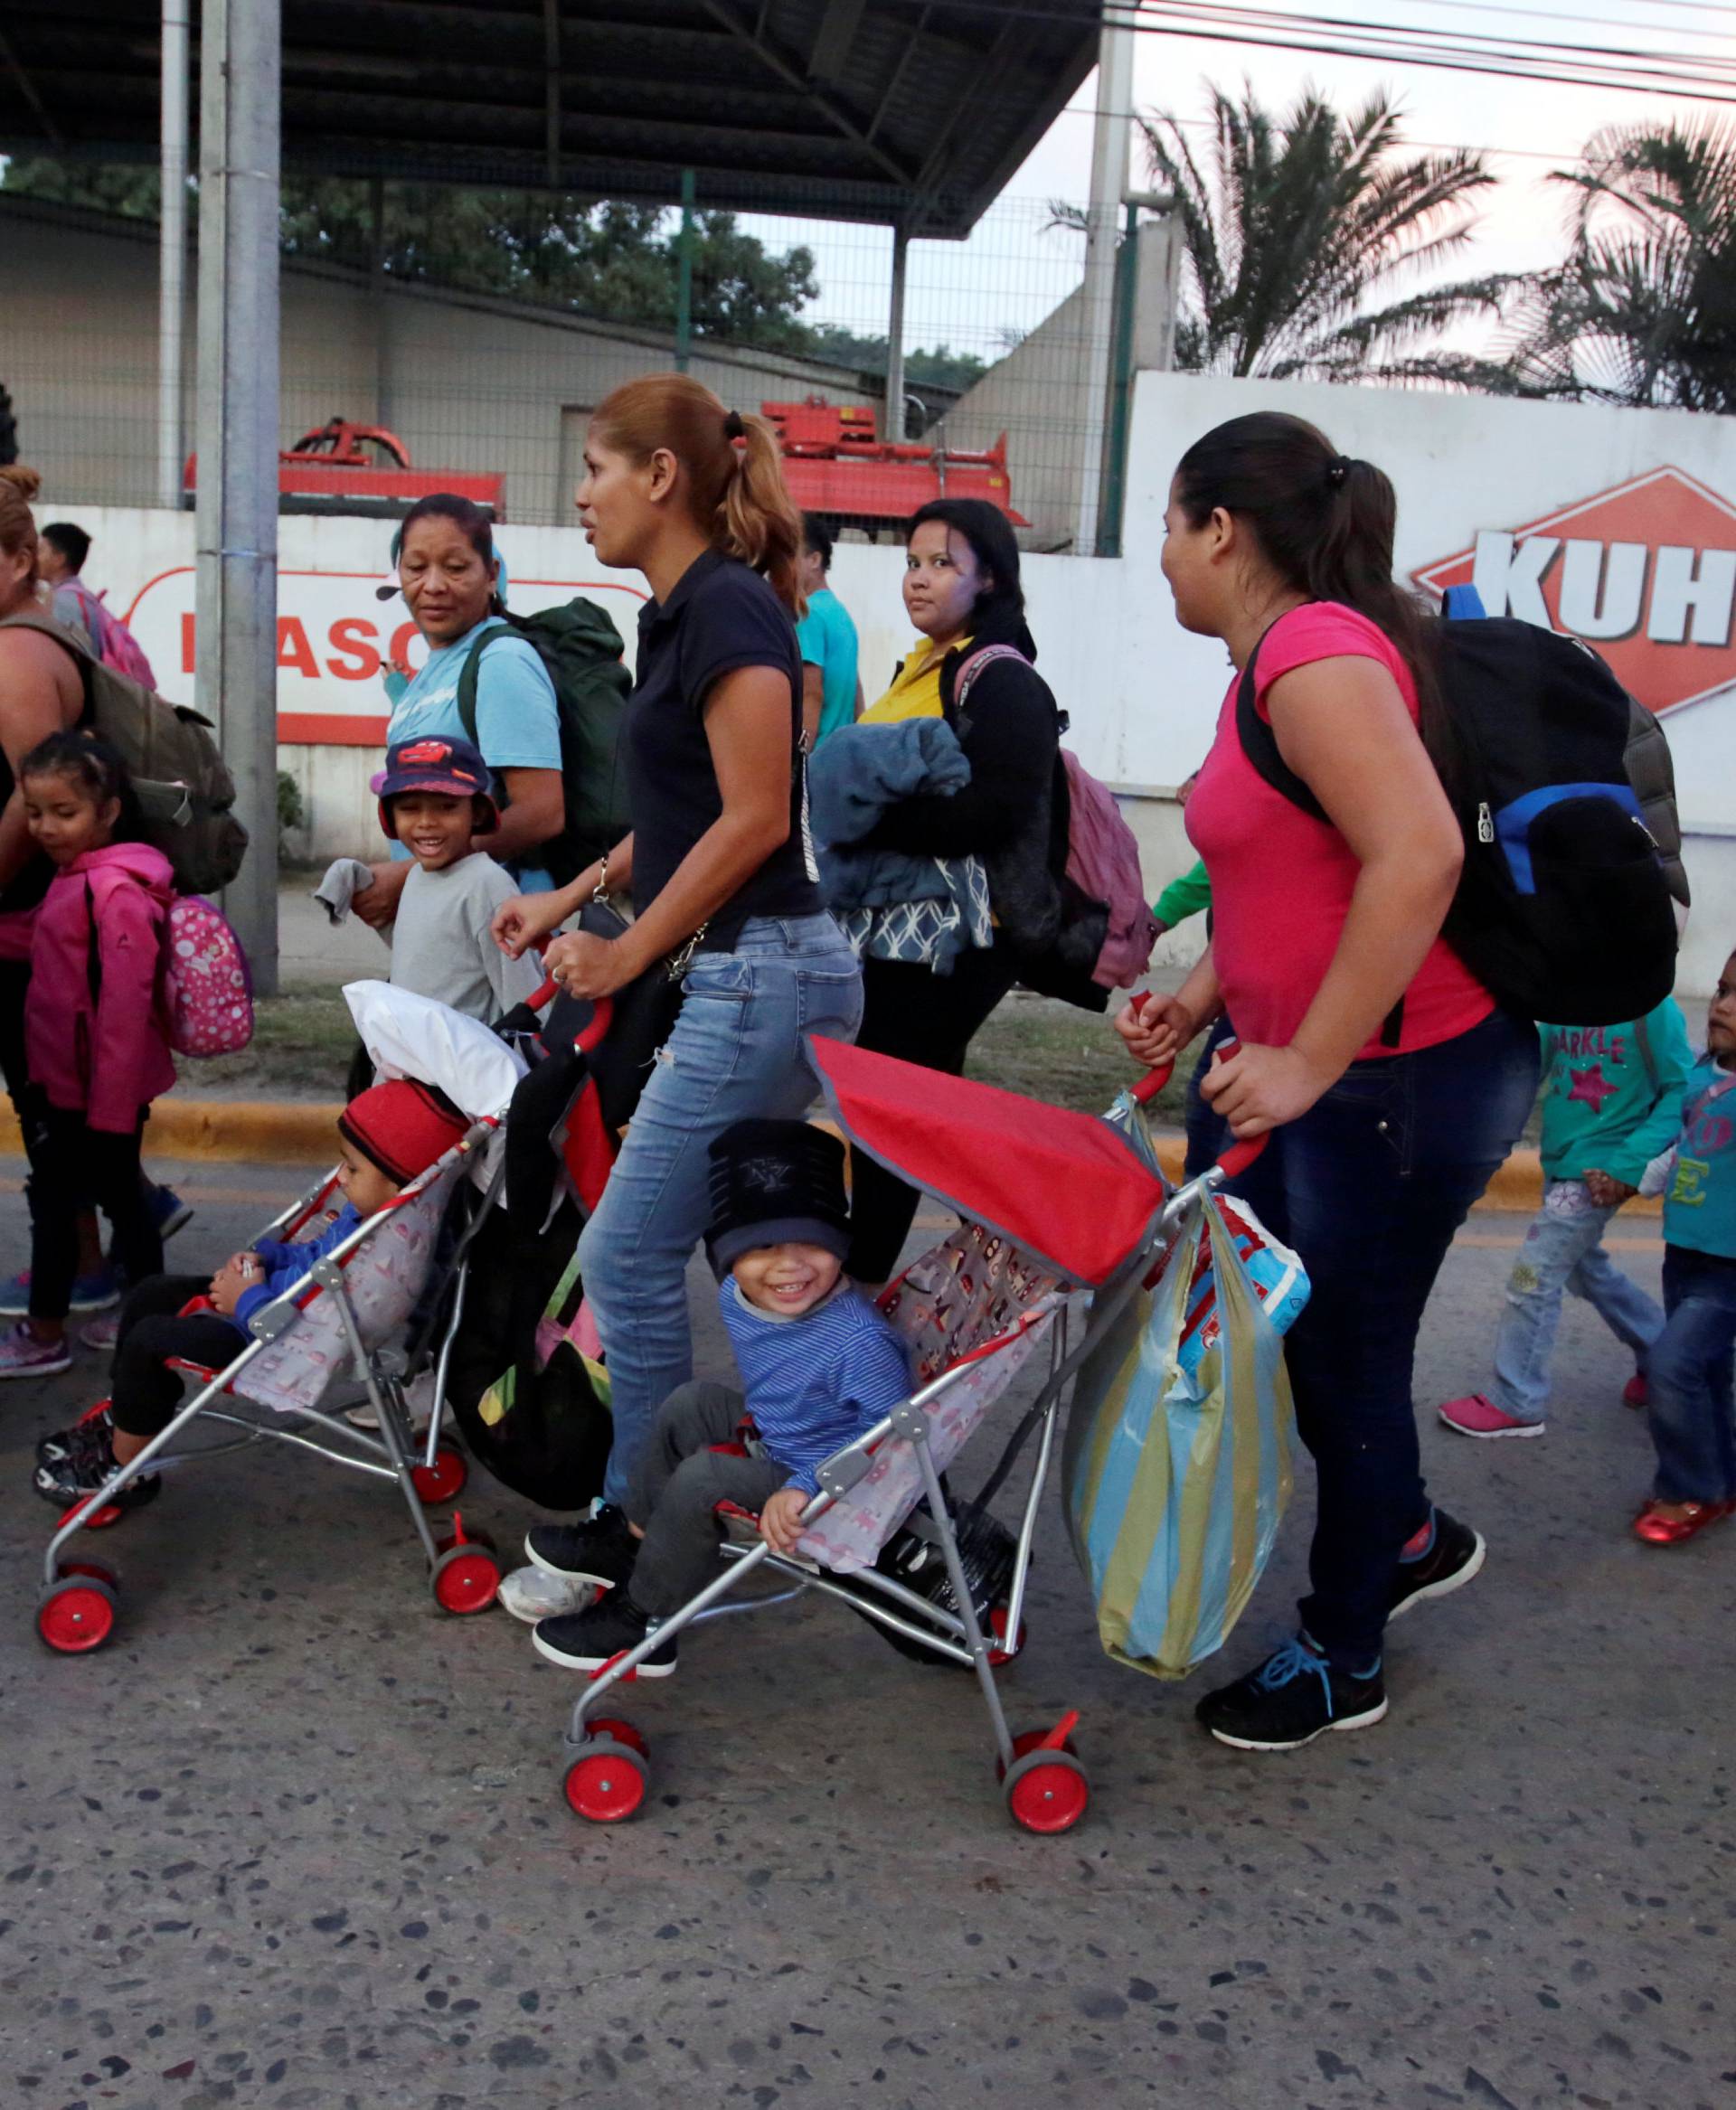 A large group of Hondurans fleeing poverty and violence, move in a caravan toward the United States, in San Pedro Sula